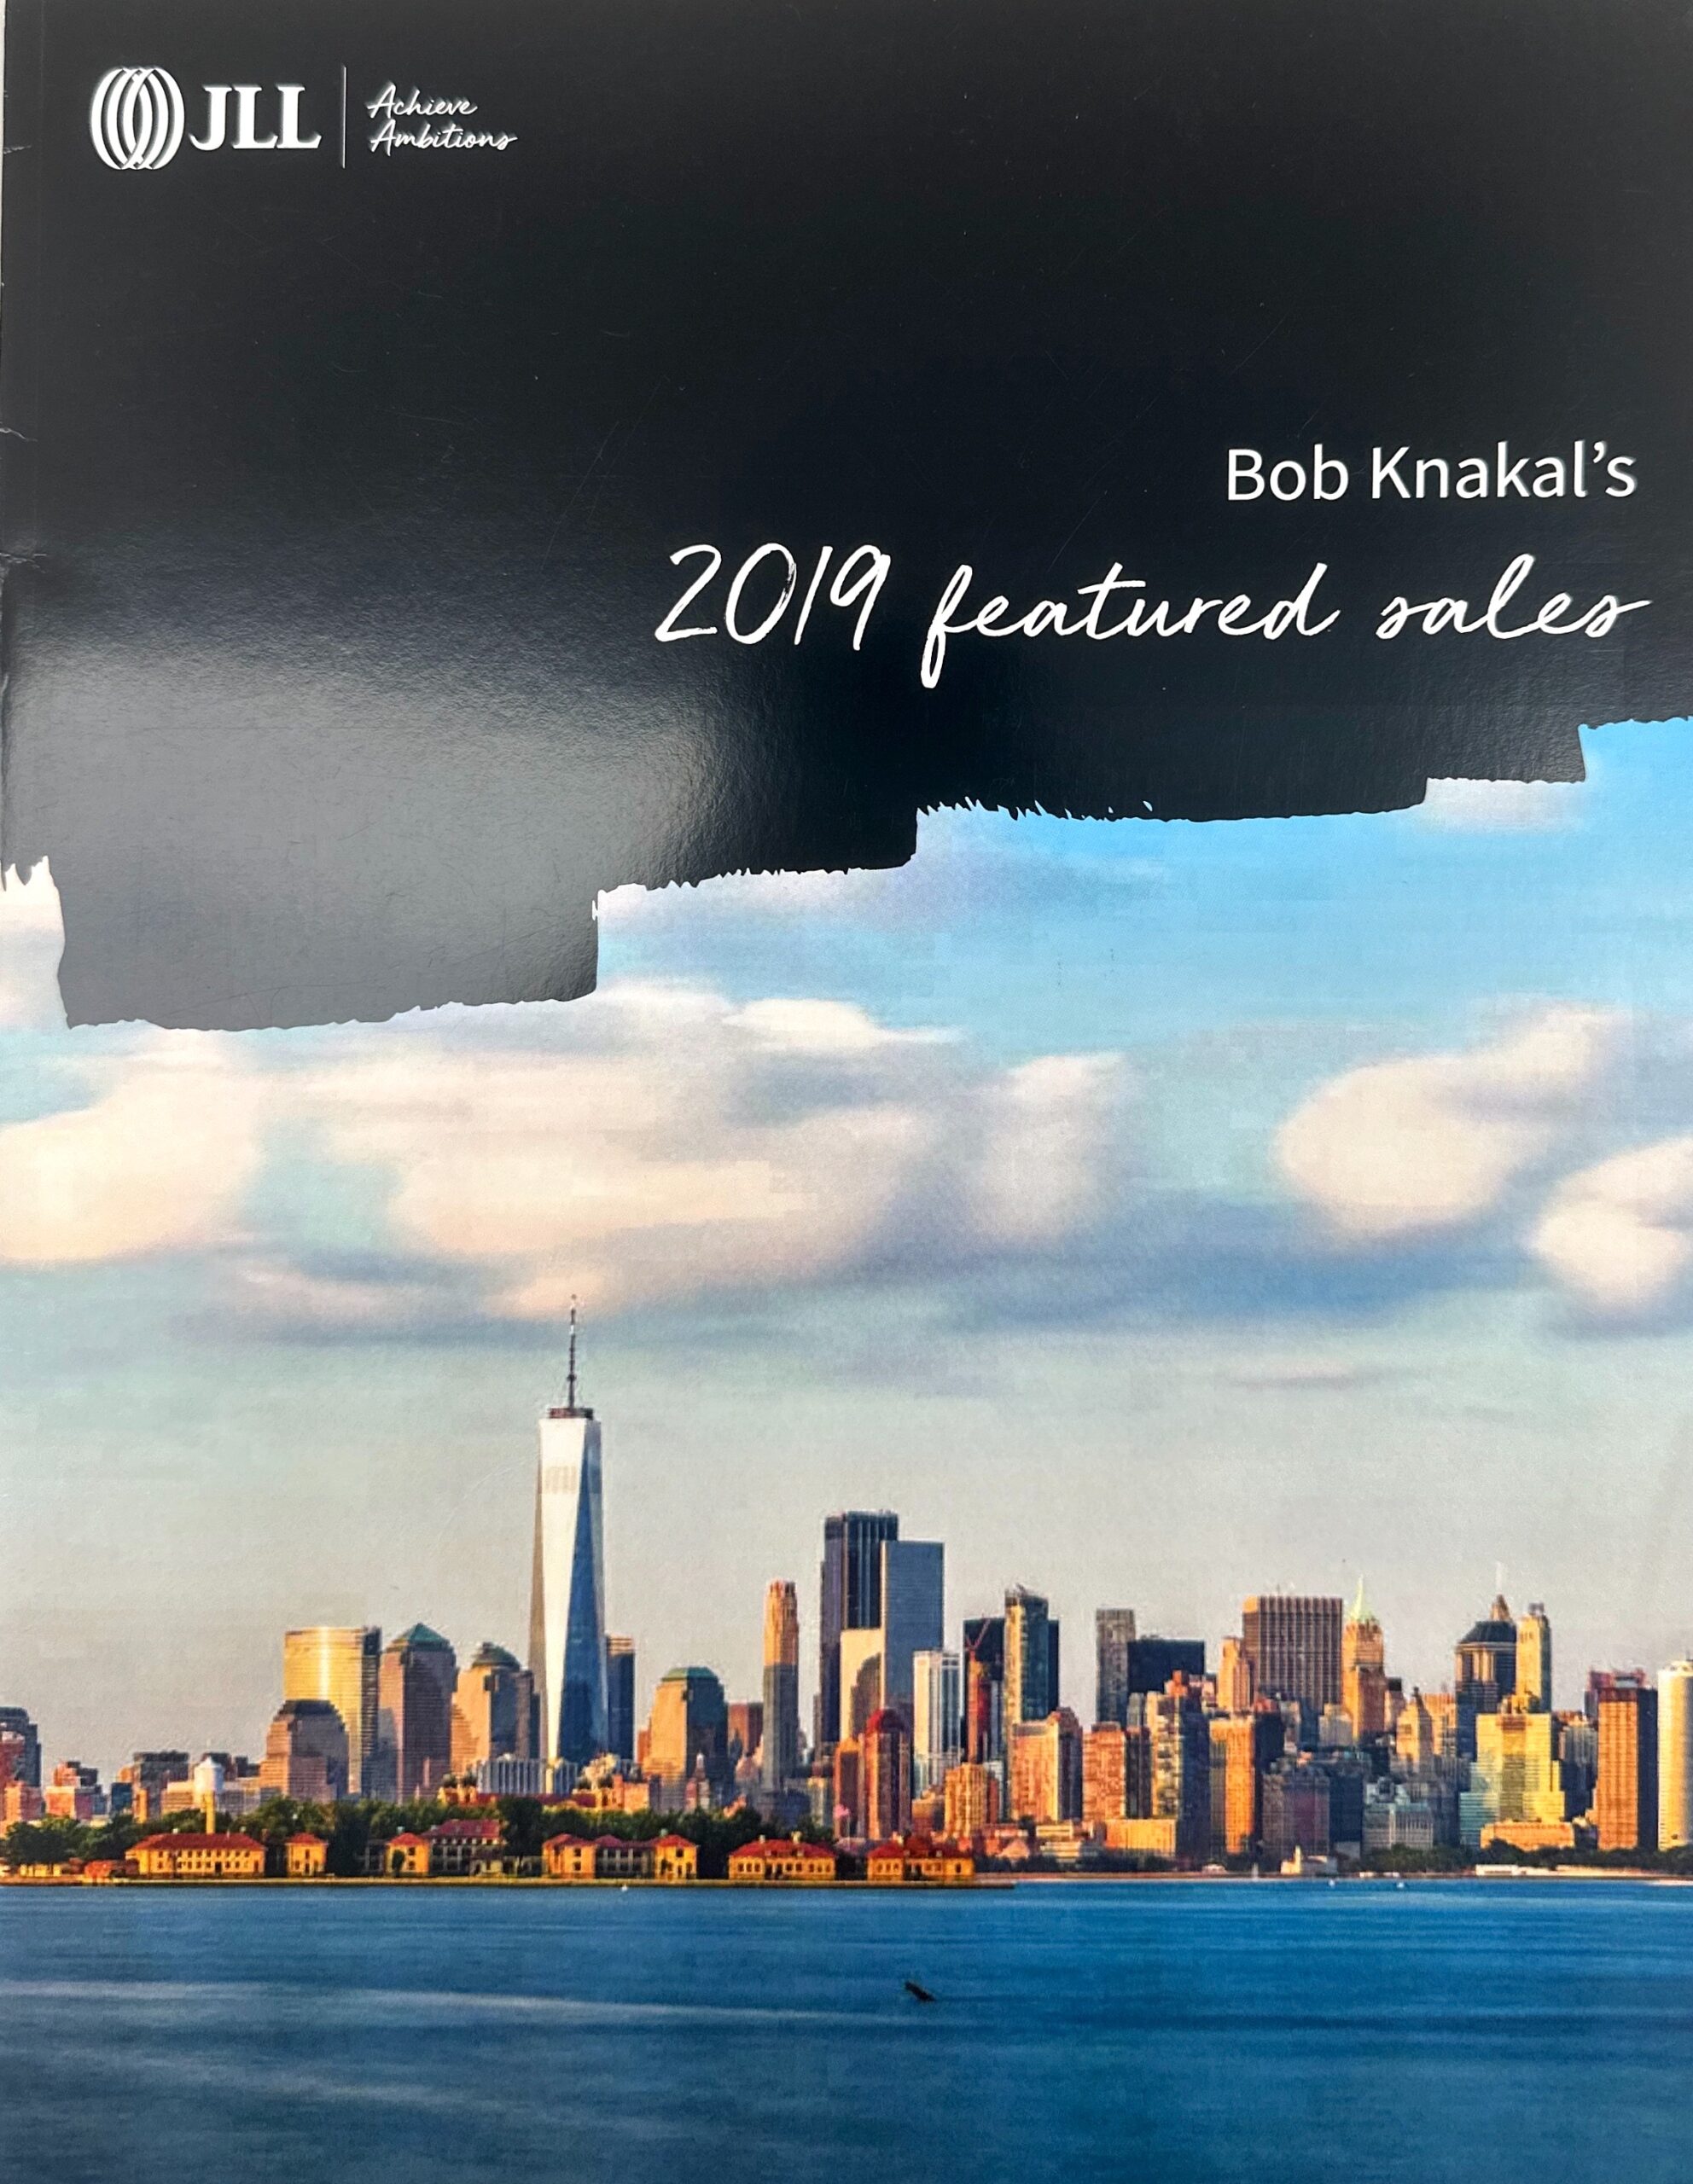 Bob Knakals 2019 Featured Sales scaled